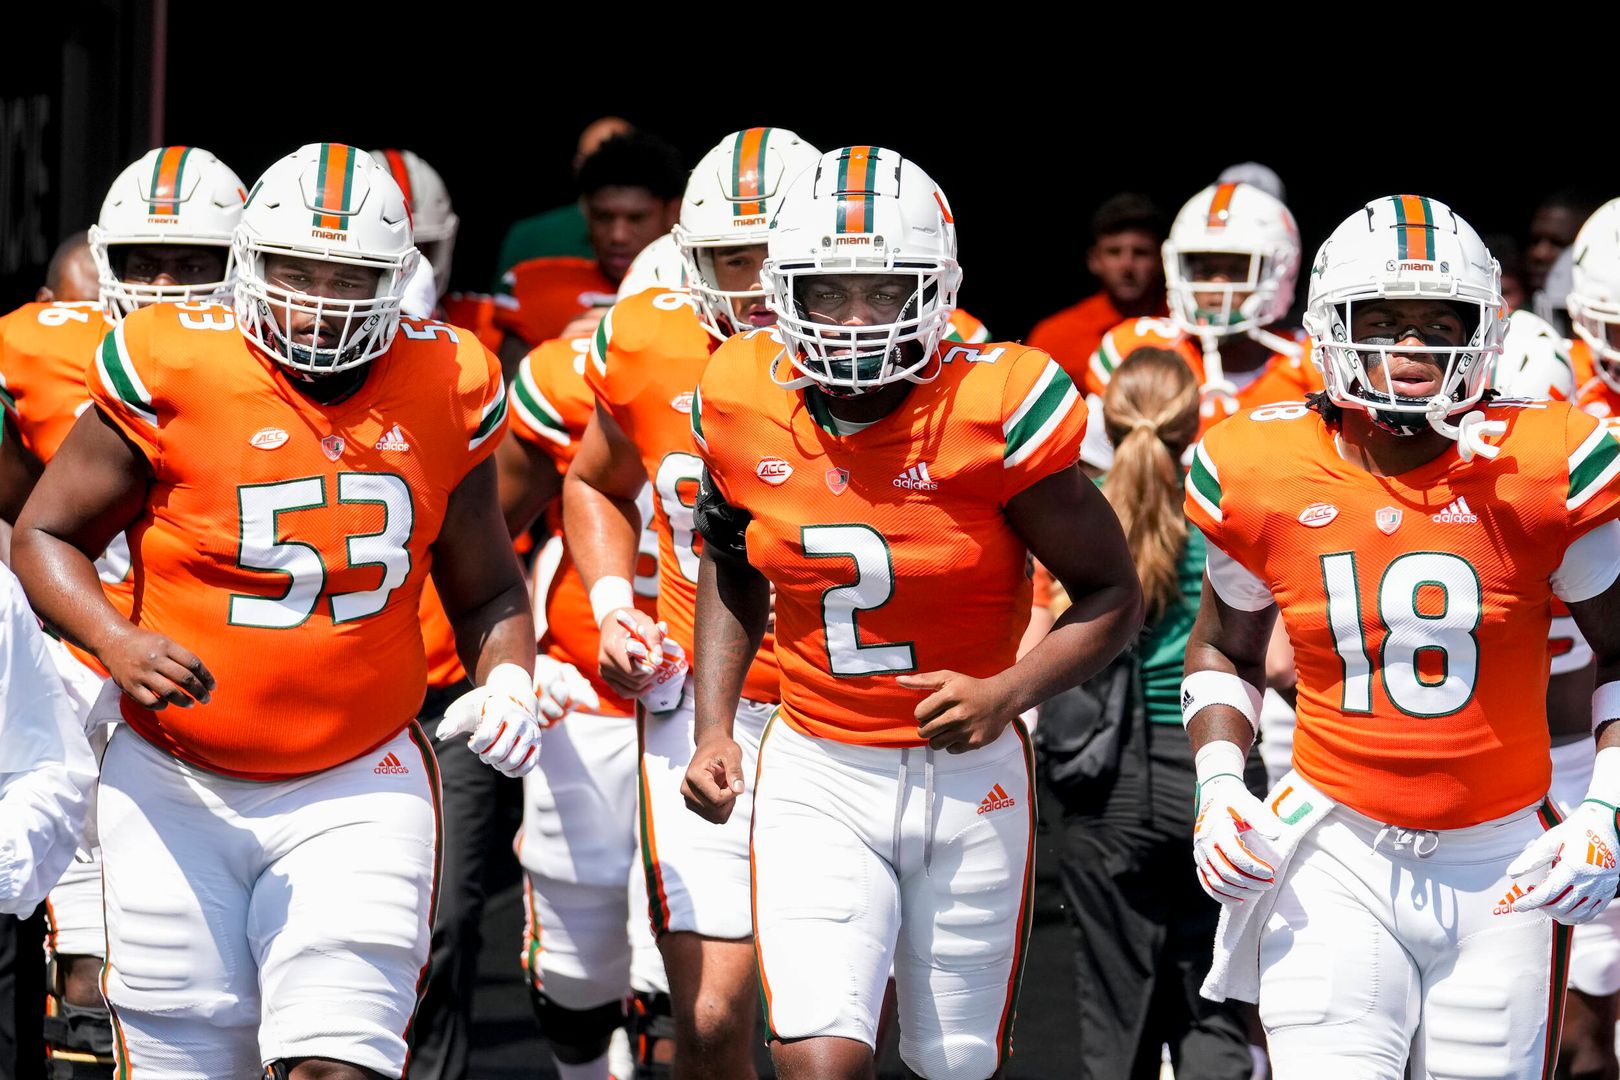 Canes Gear Up to Kick Off ACC Play